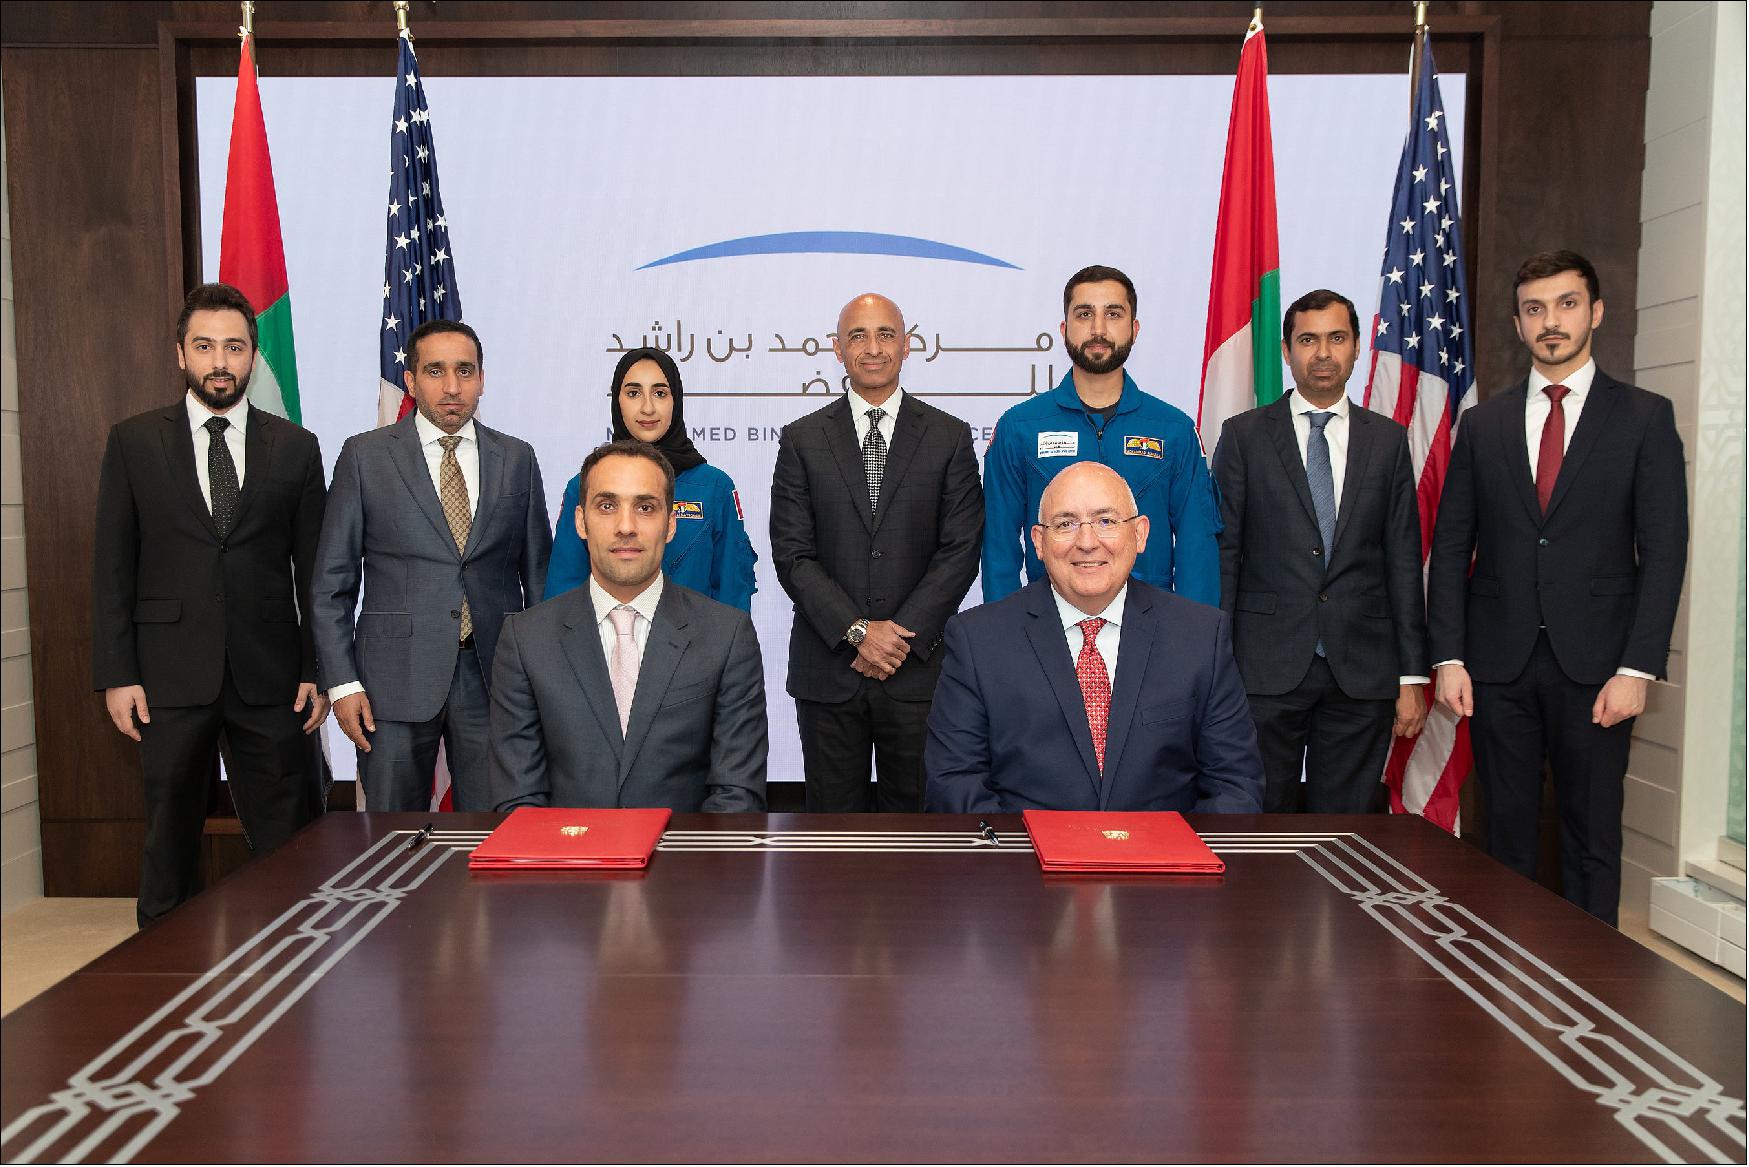 Figure 11: Axiom Space and the Mohammed bin Rashid Space Center (MBRSC) signed an agreement for a United Arab Emirates (UAE) astronaut to fly on the International Space Station in 2023. The agreement was signed at the Embassy of the United Arab Emirates in Washington, D.C. on April 27 by Salem Humaid AlMarri, Director-General of MBRSC and Michael Suffredini, President and CEO of Axiom Space (image credit: MBRSC)